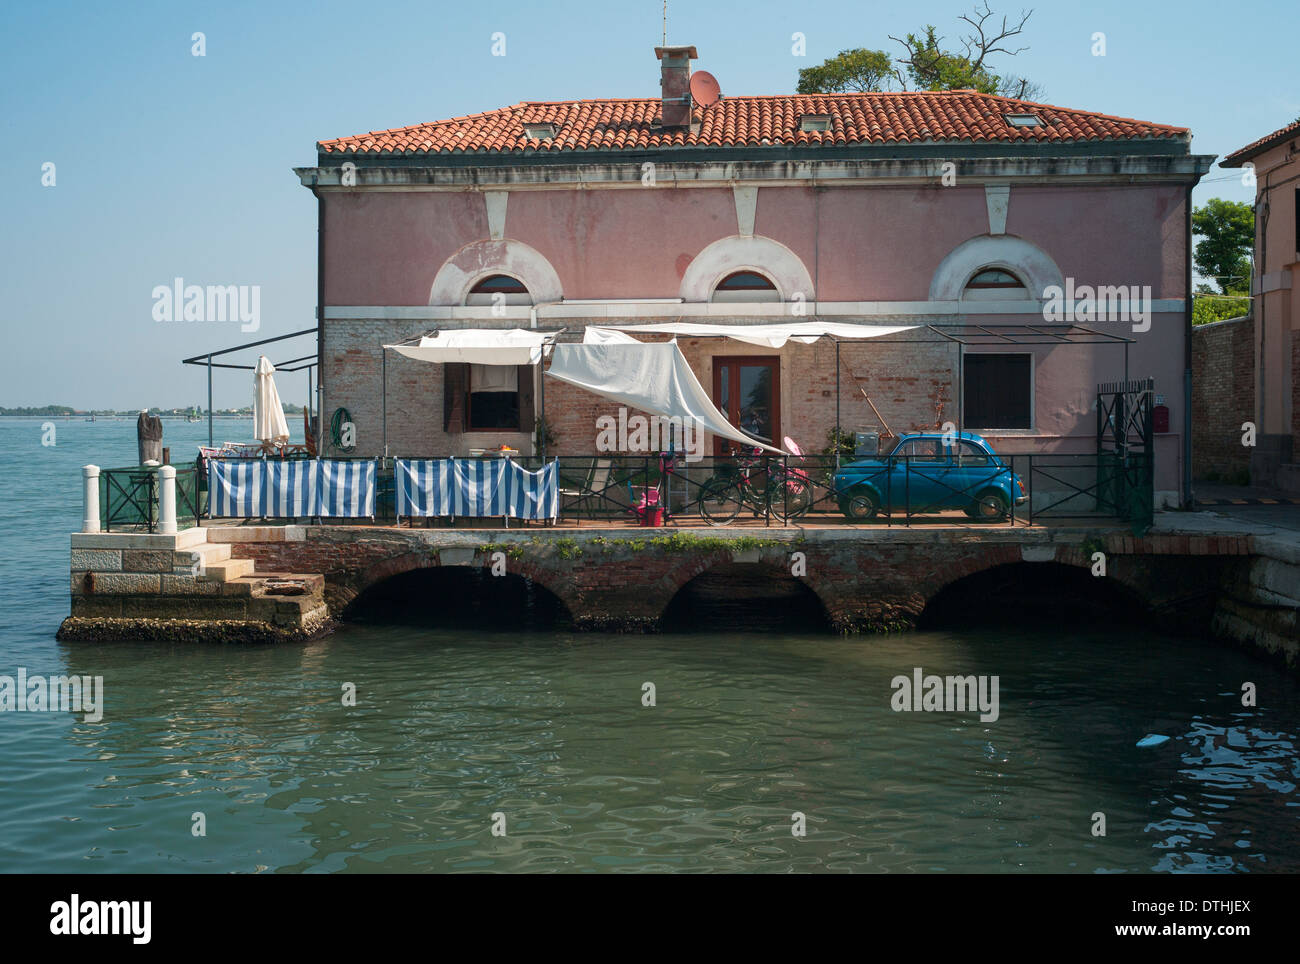 Typical local house and old Fiat 500 on Venice Lido Stock Photo